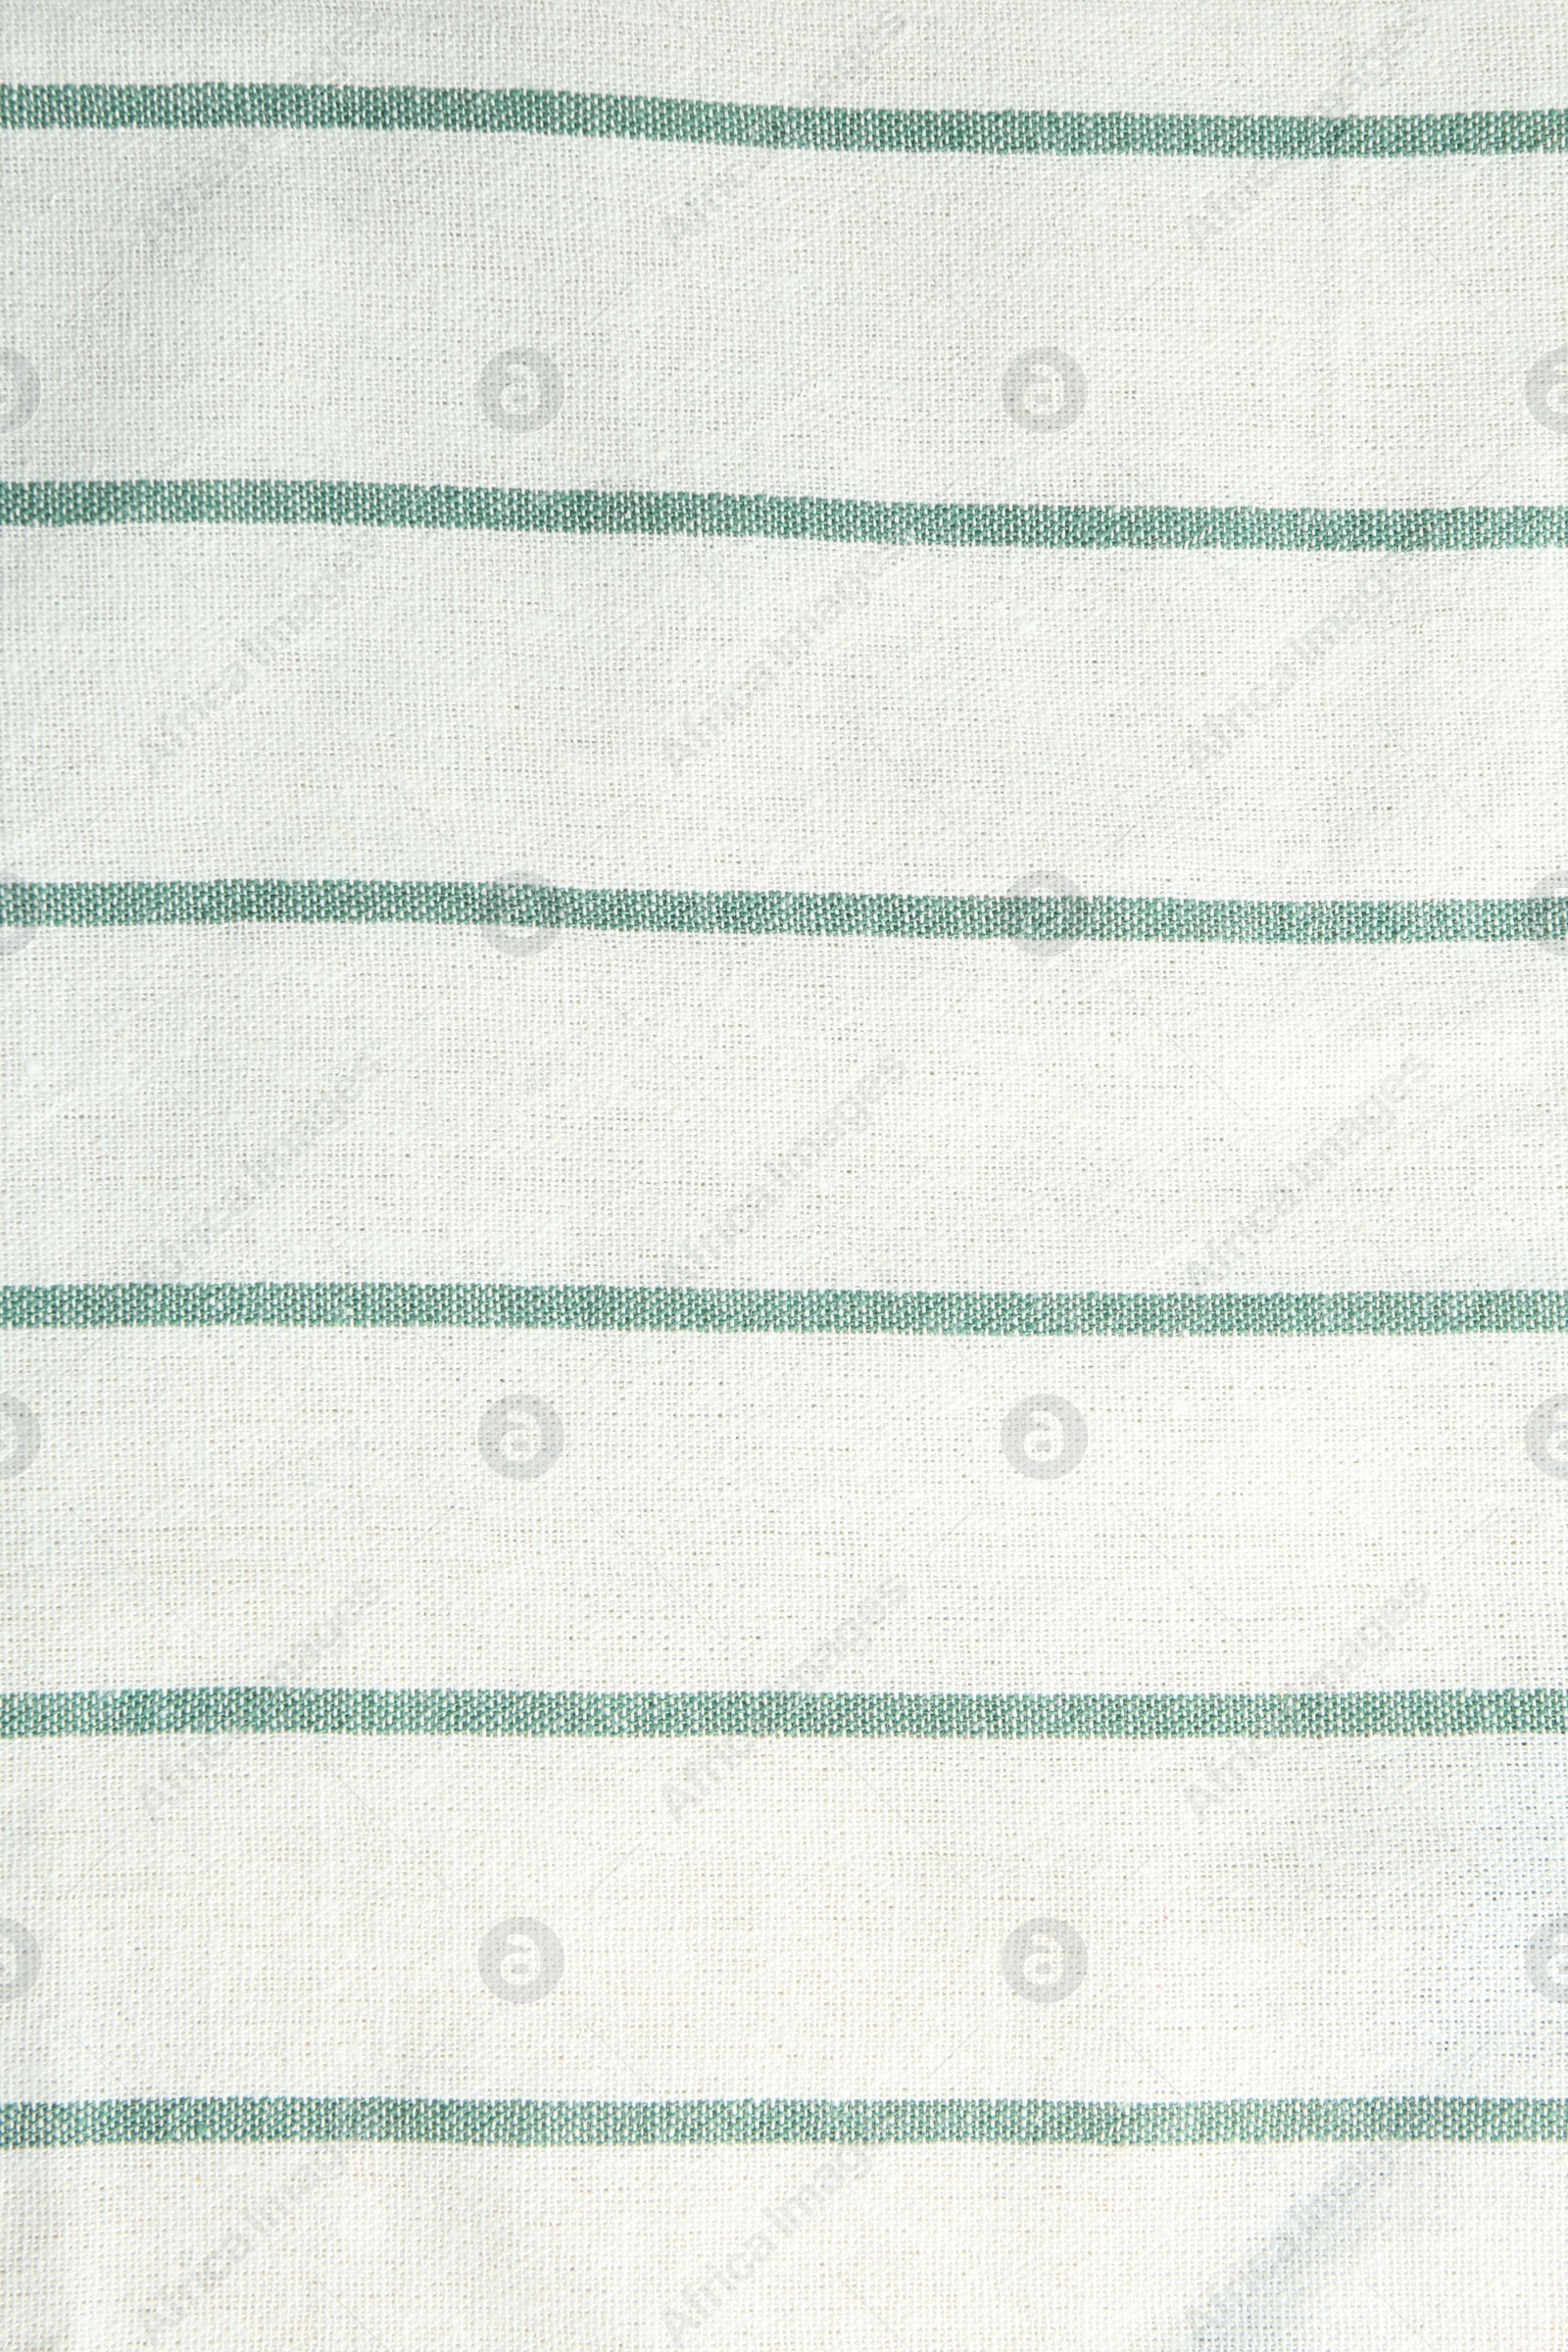 Photo of Texture of white striped fabric as background, closeup